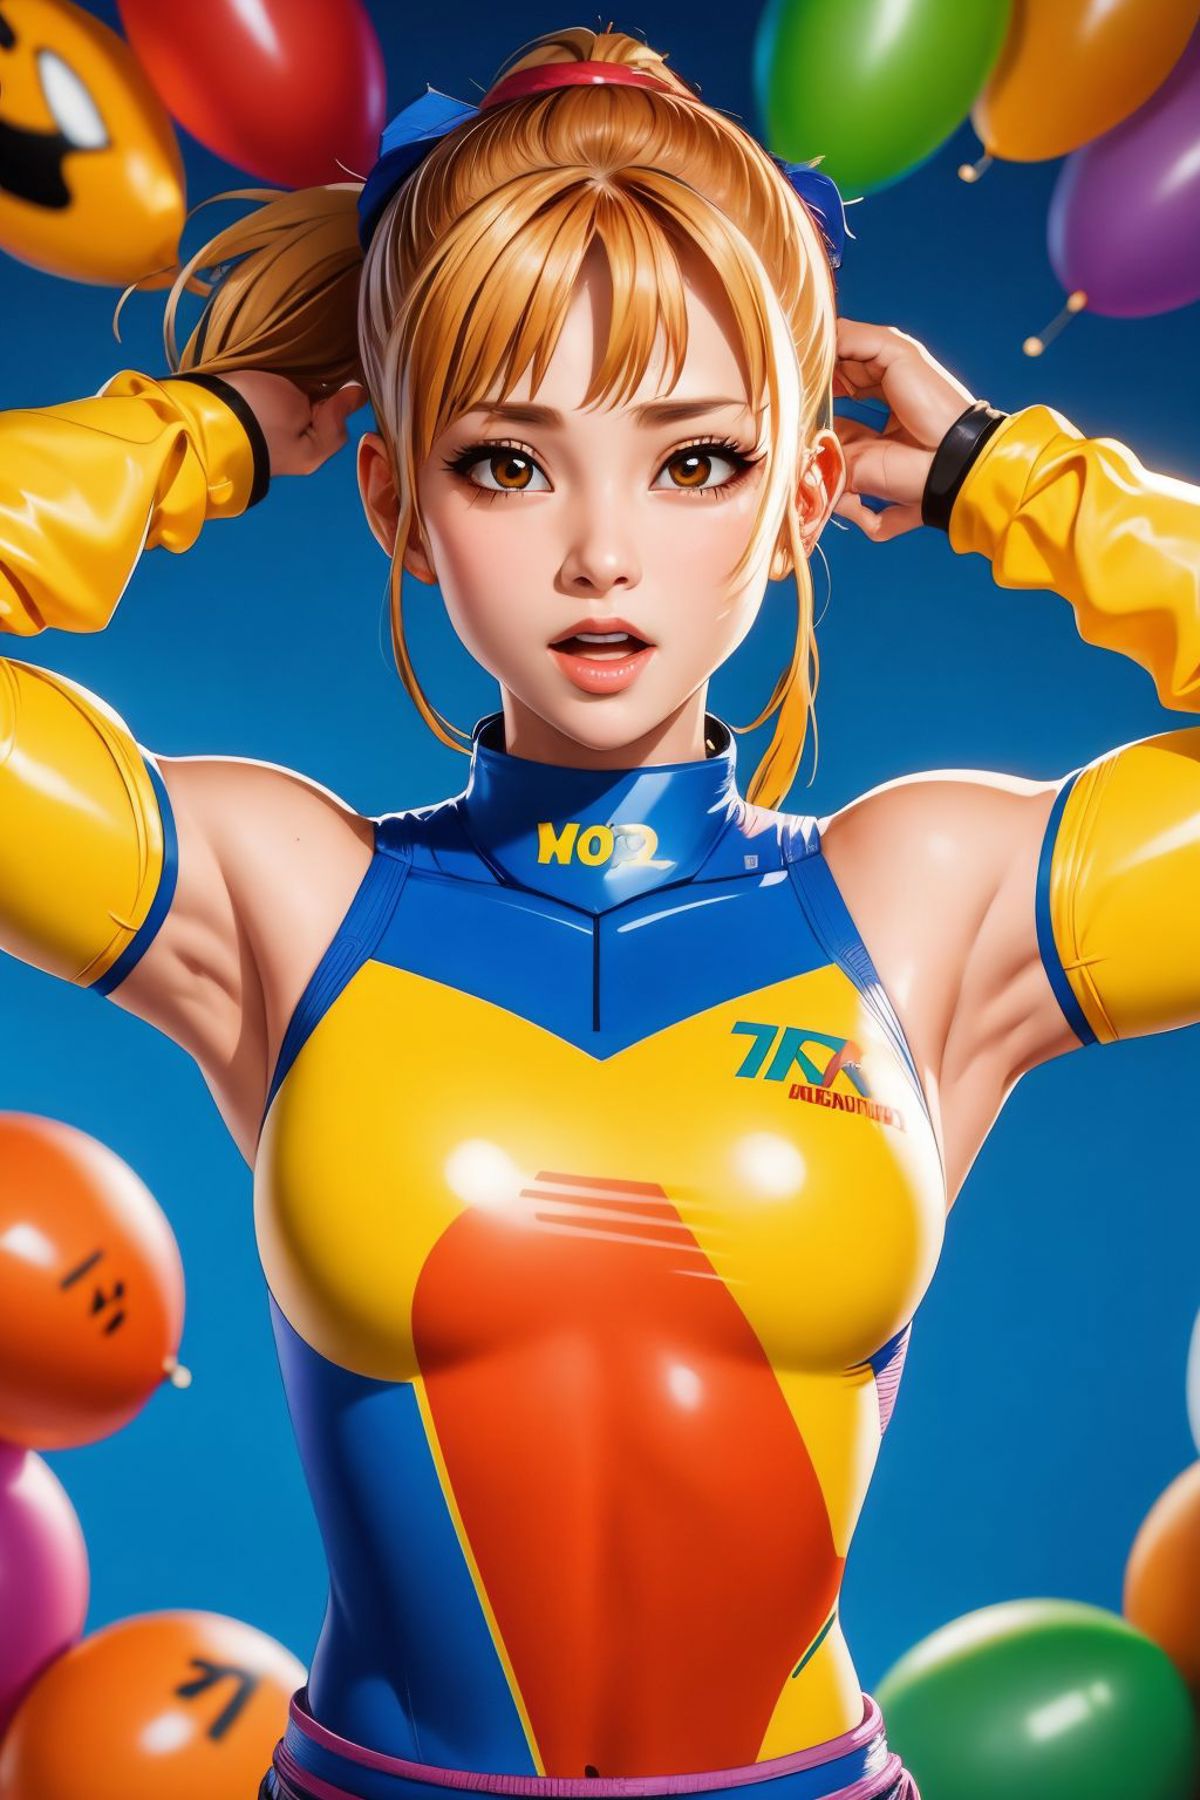 Anime-style illustration of a girl in a tight, blue and yellow bodysuit.